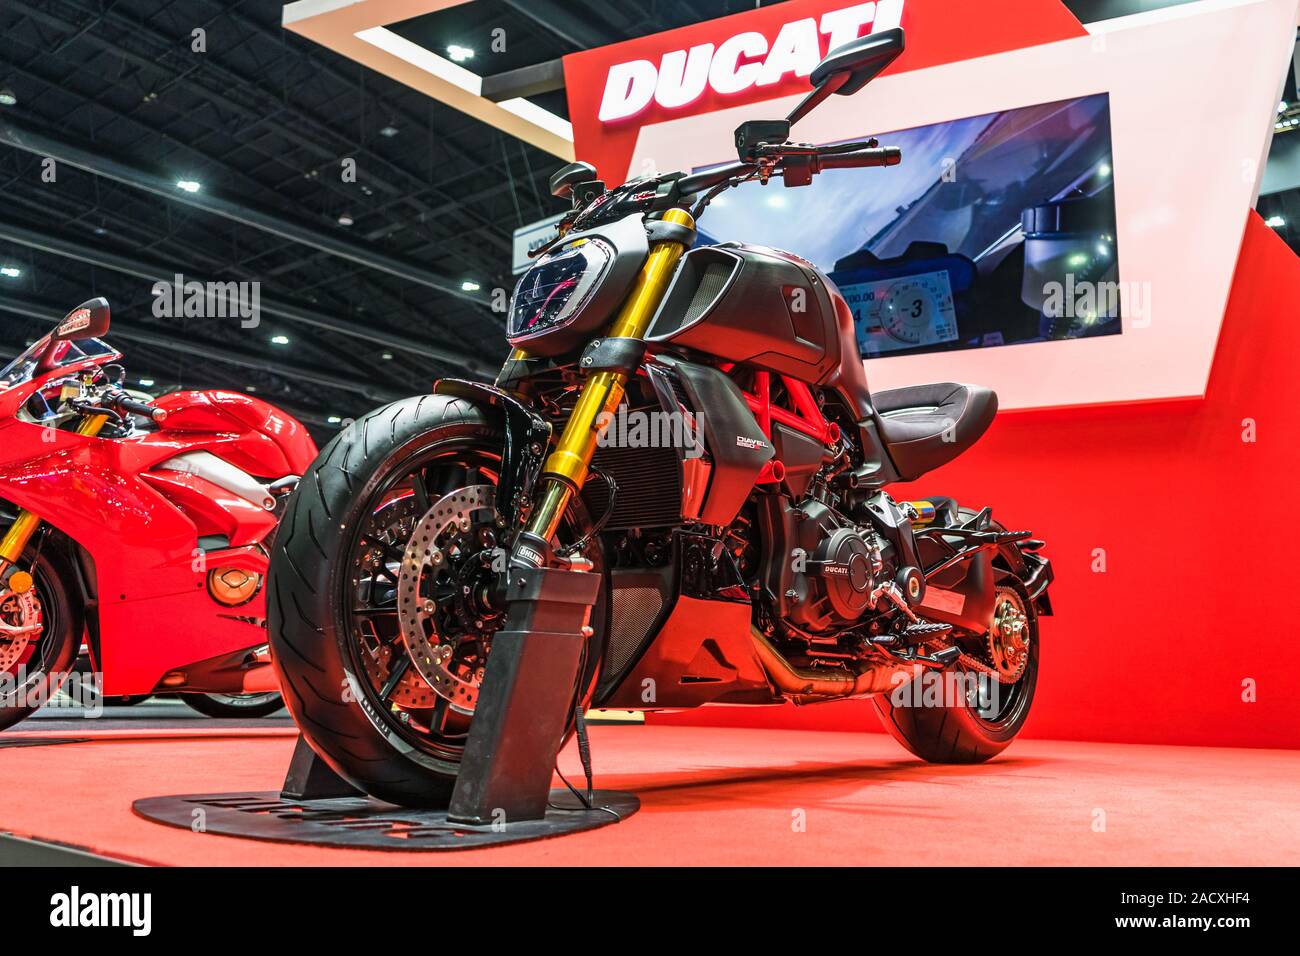 Bangkok, Thailand - Decemebr 3, 2019 : Italian powerhouse motorcycle Ducati diavel 1260S, mixes styling cues from sport bikes, sport nakeds and cruise Stock Photo